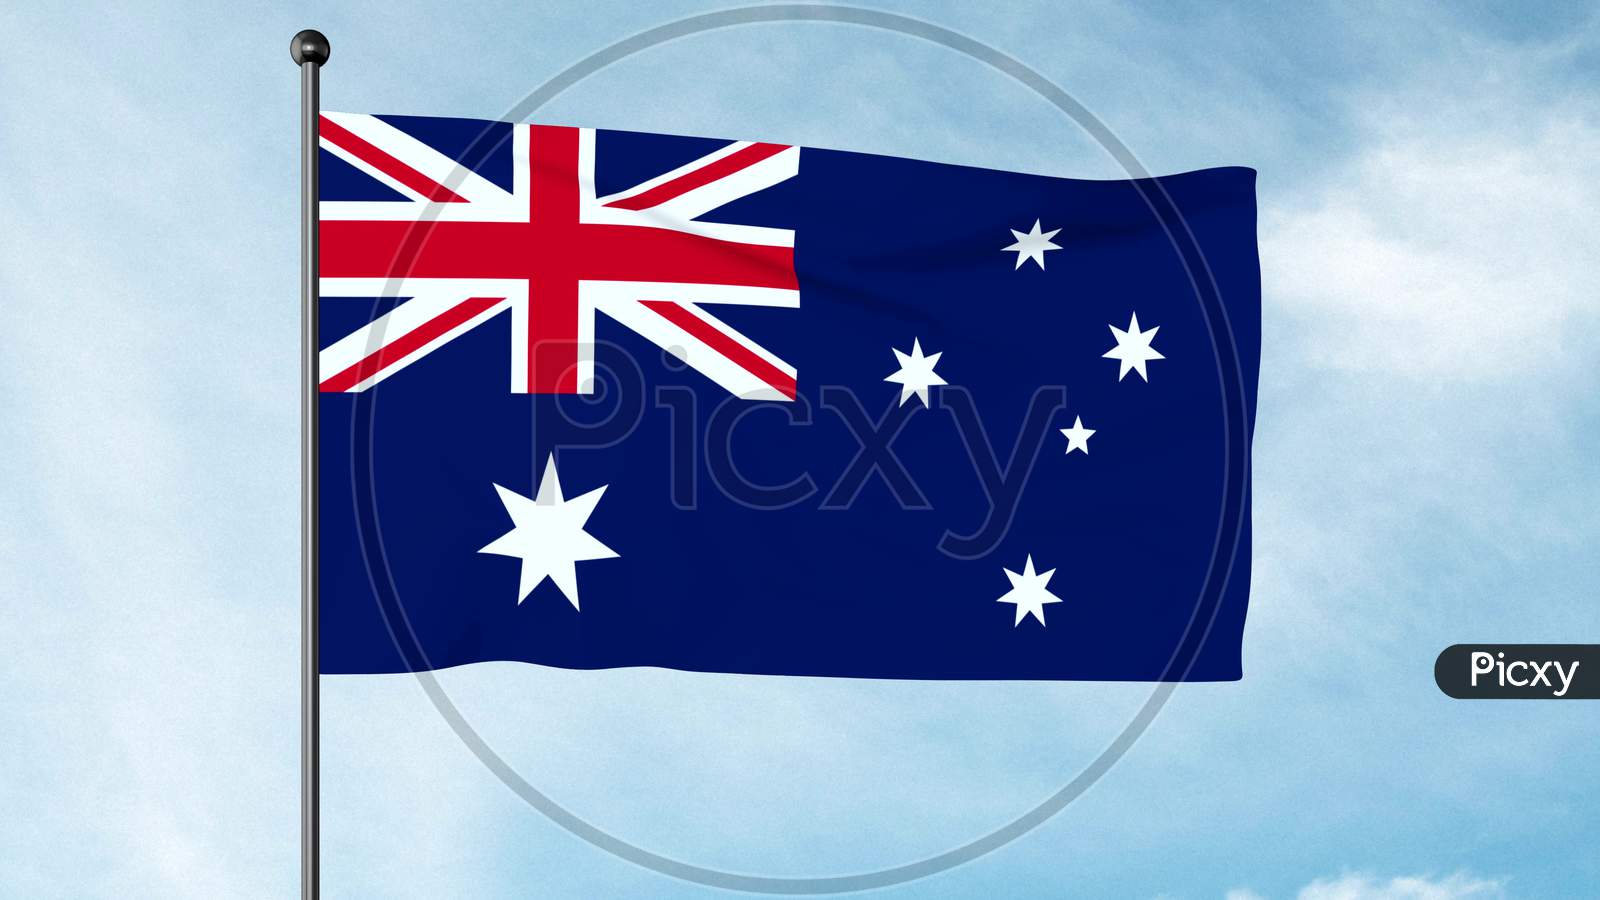 3D Illustration Of The Flag Of Australia Is Based On The British Maritime Blue Ensign – A Blue Field With The United Kingdom Flag In The Canton Or Upper Hoist Quarter.